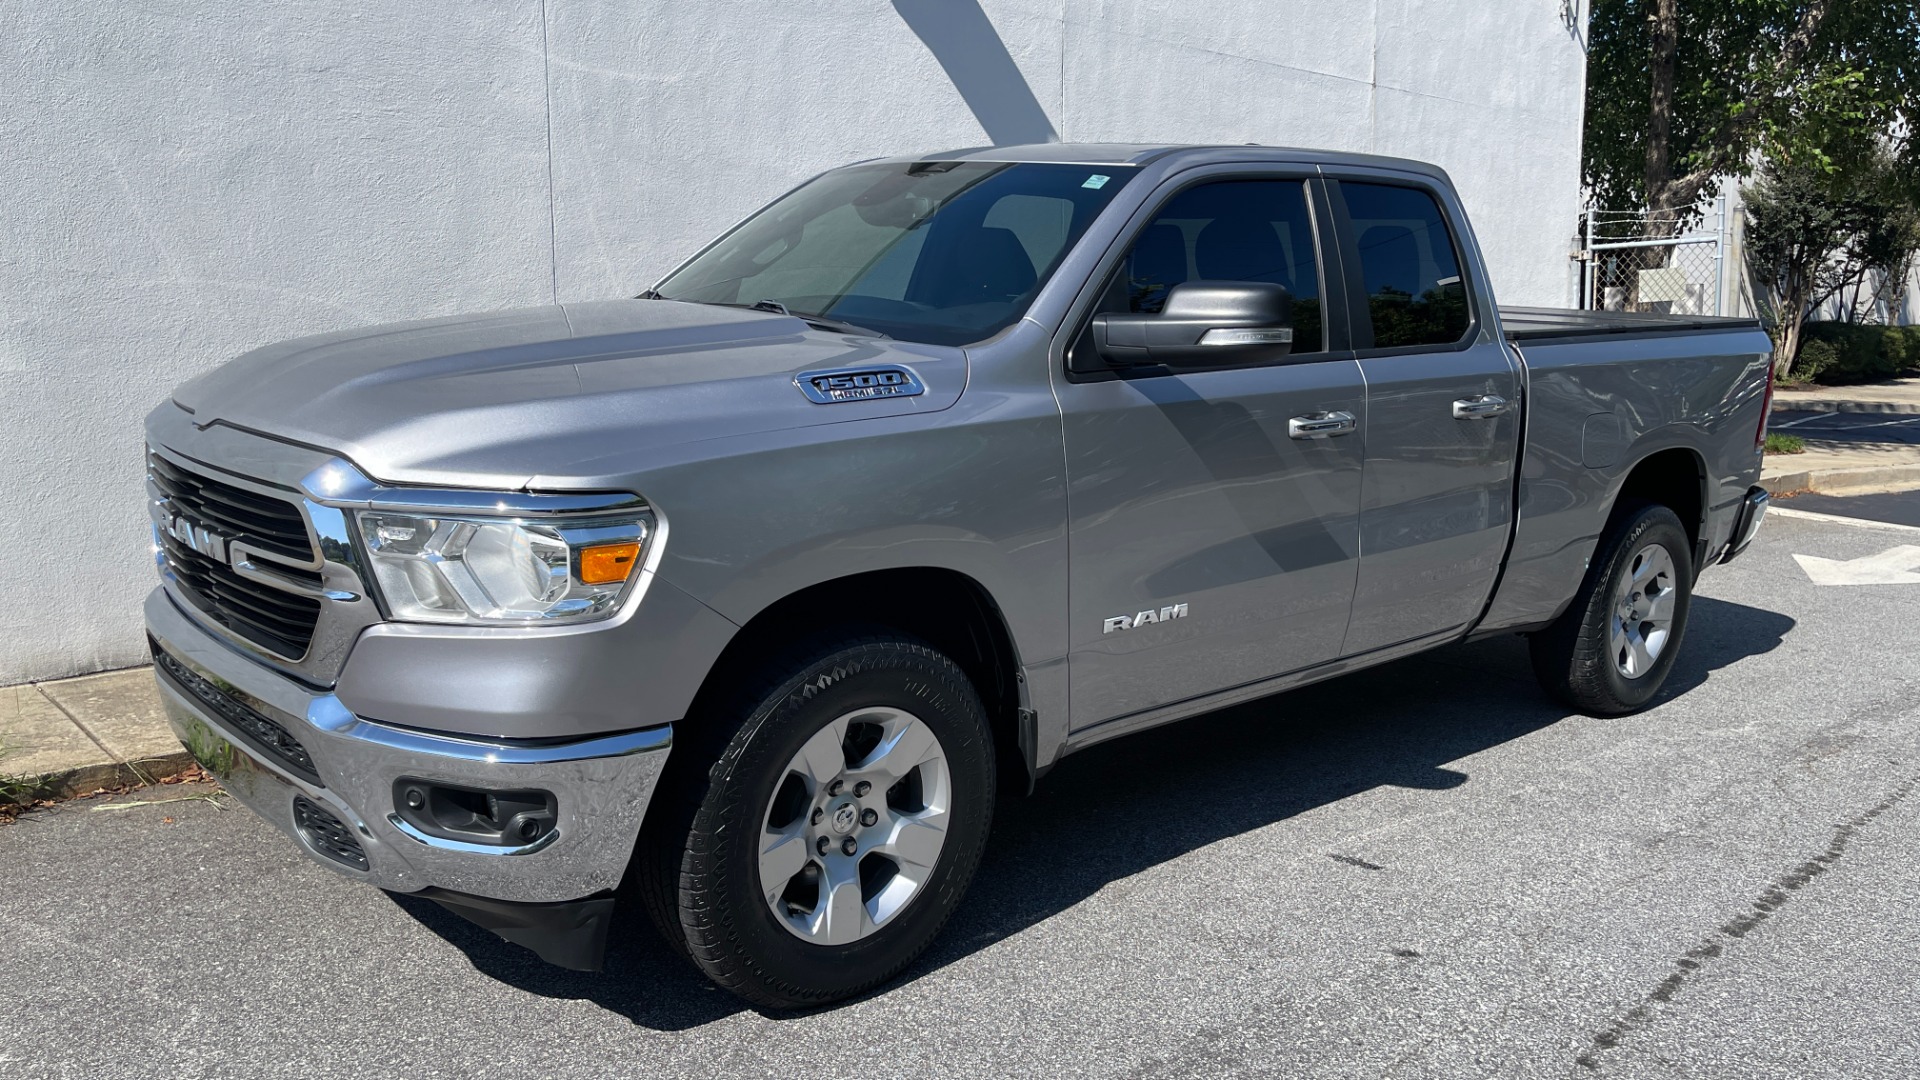 Used 2019 Ram 1500 Big Horn / 4X4 / DOUBLE CAB / 5.7L HEMI / LVL 2 EQUIPMENT / CLOTH for sale $33,995 at Formula Imports in Charlotte NC 28227 7